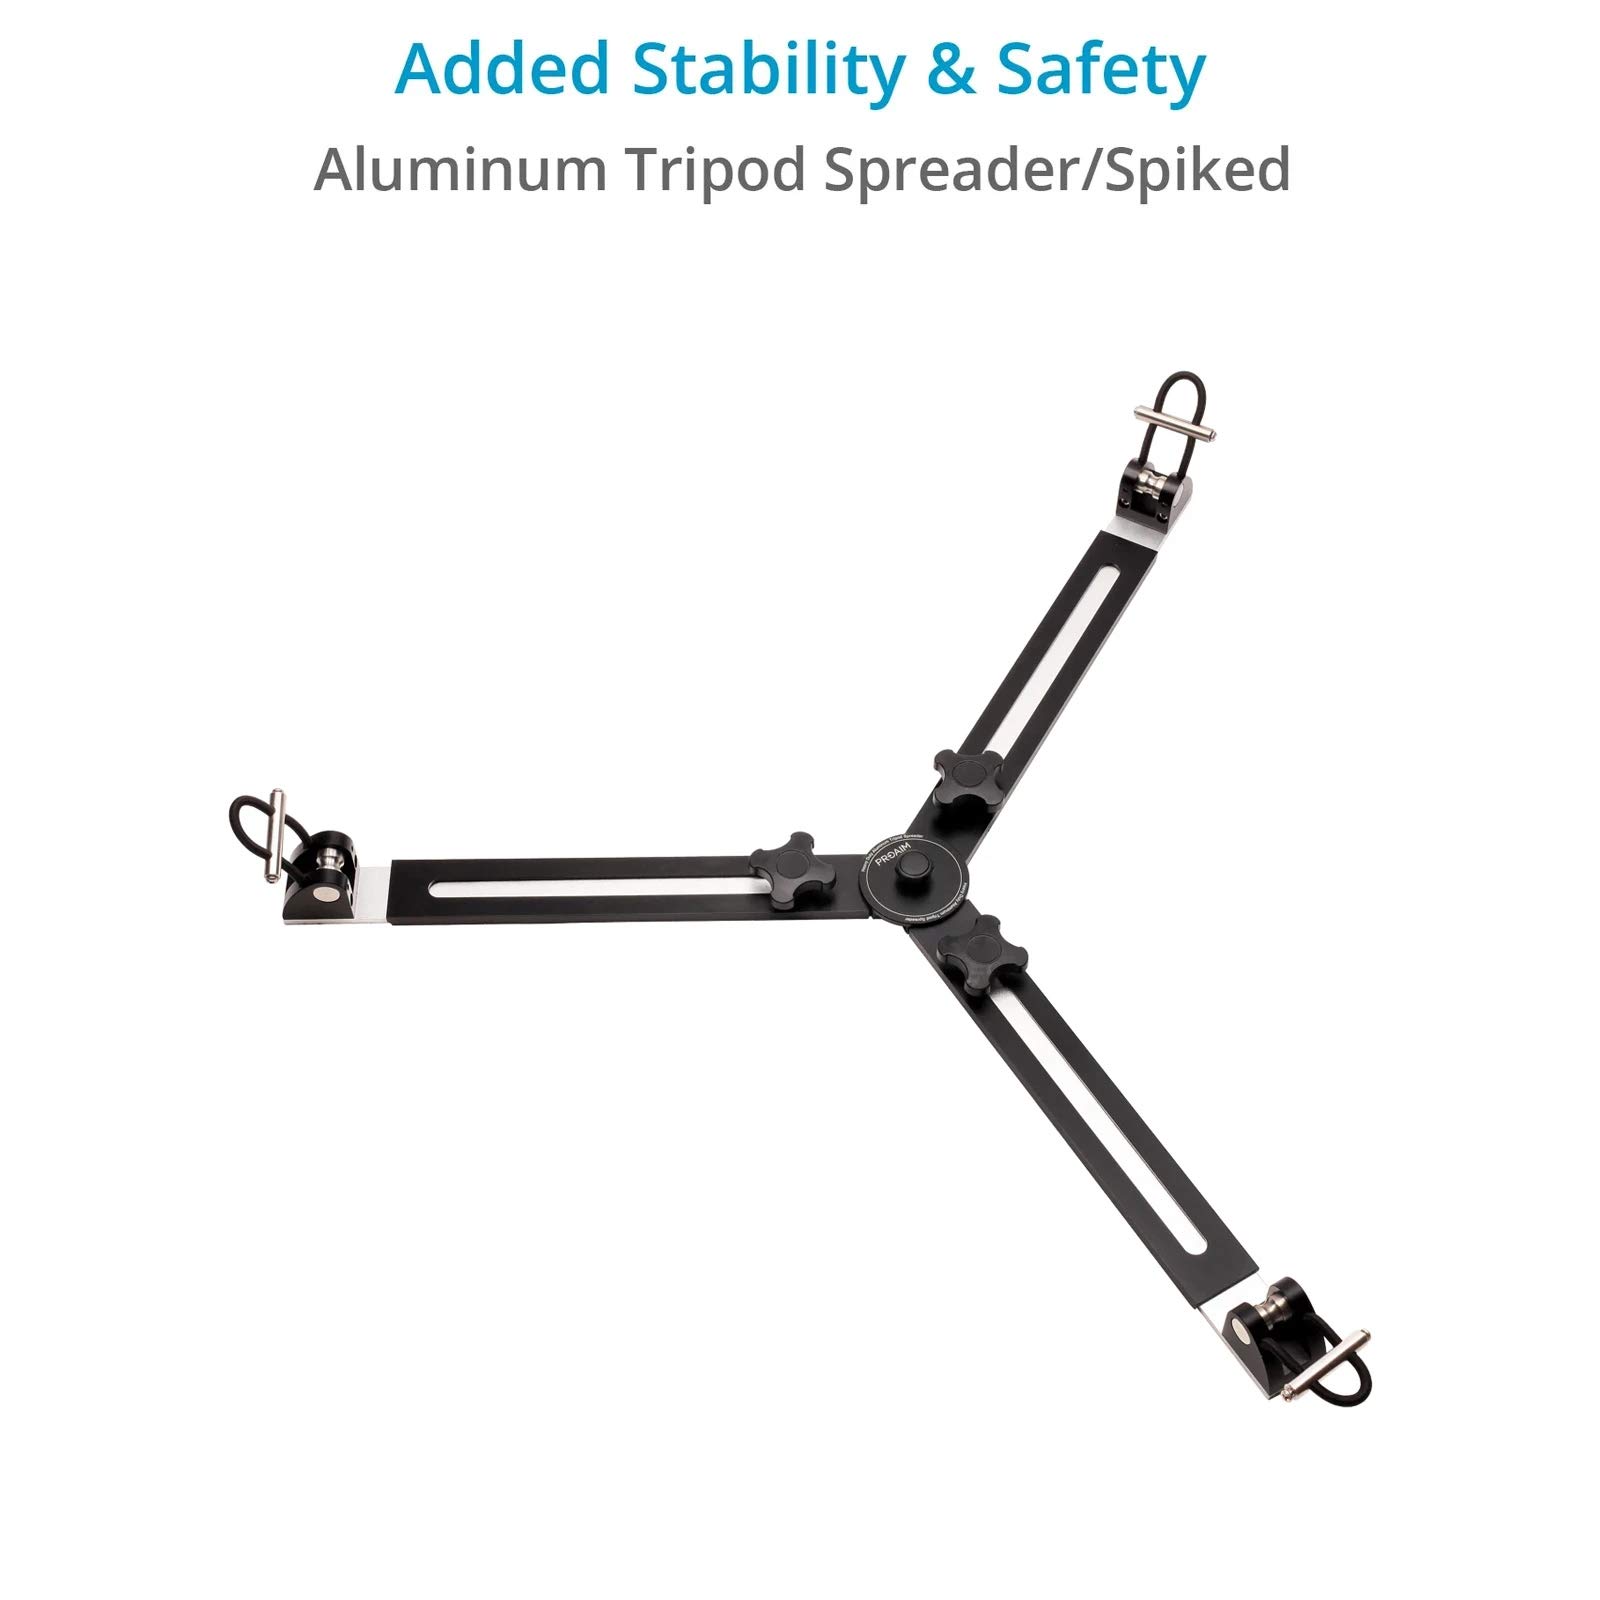 Proaim 100mm Camera Tripod Stand with Aluminum Spreader. Payload of up to 80kg / 176lb. (CST-100-01)